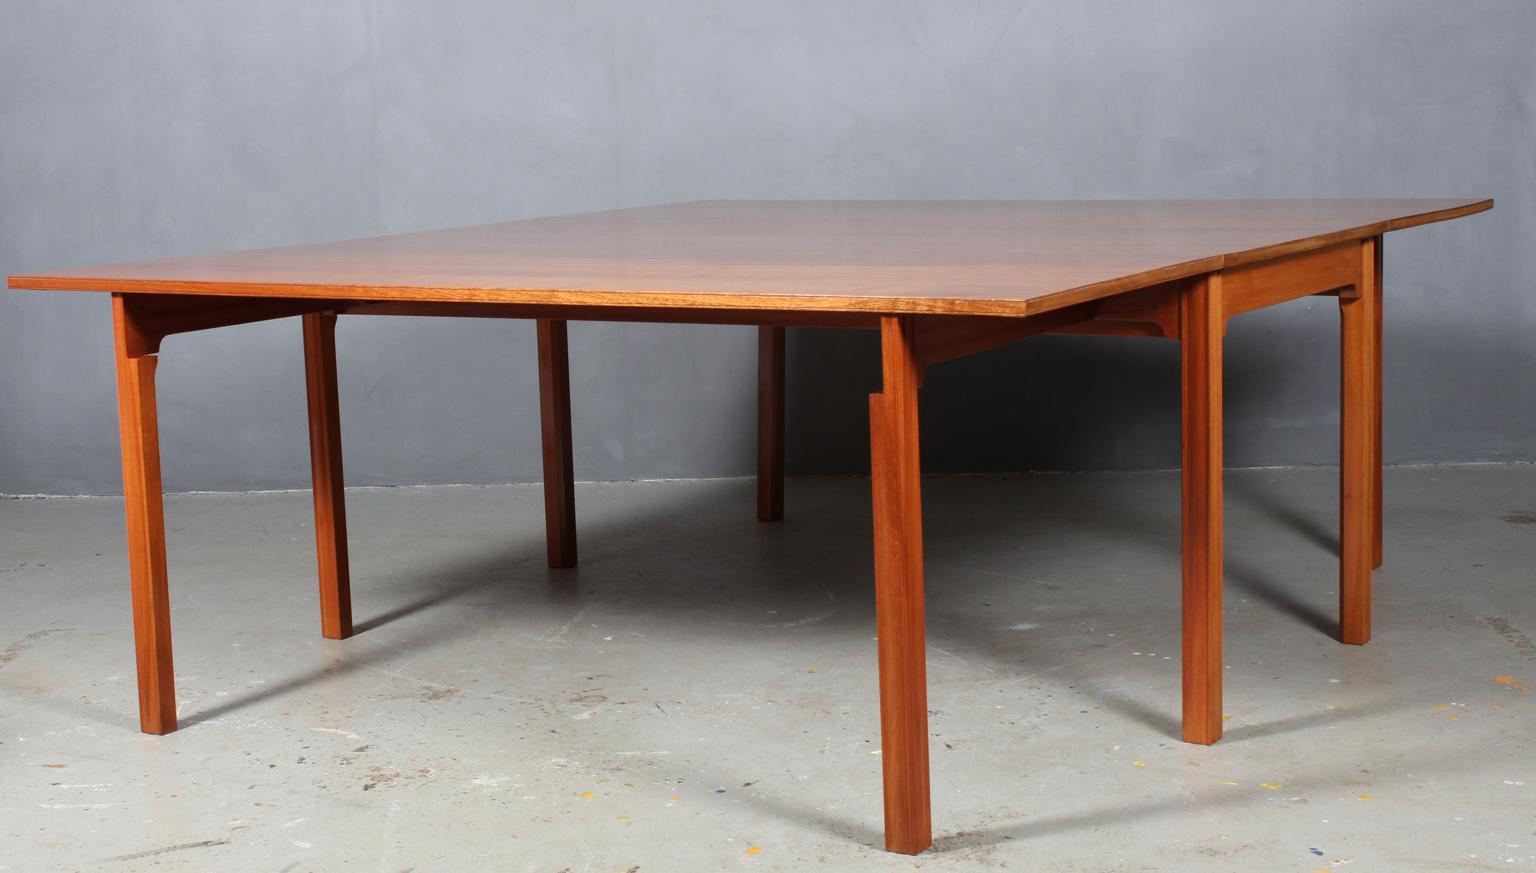 Kaare Klint table in mahogany. With drop down leaves of 65 cm

Profilated legs.

Made by Rud Rasmussen.